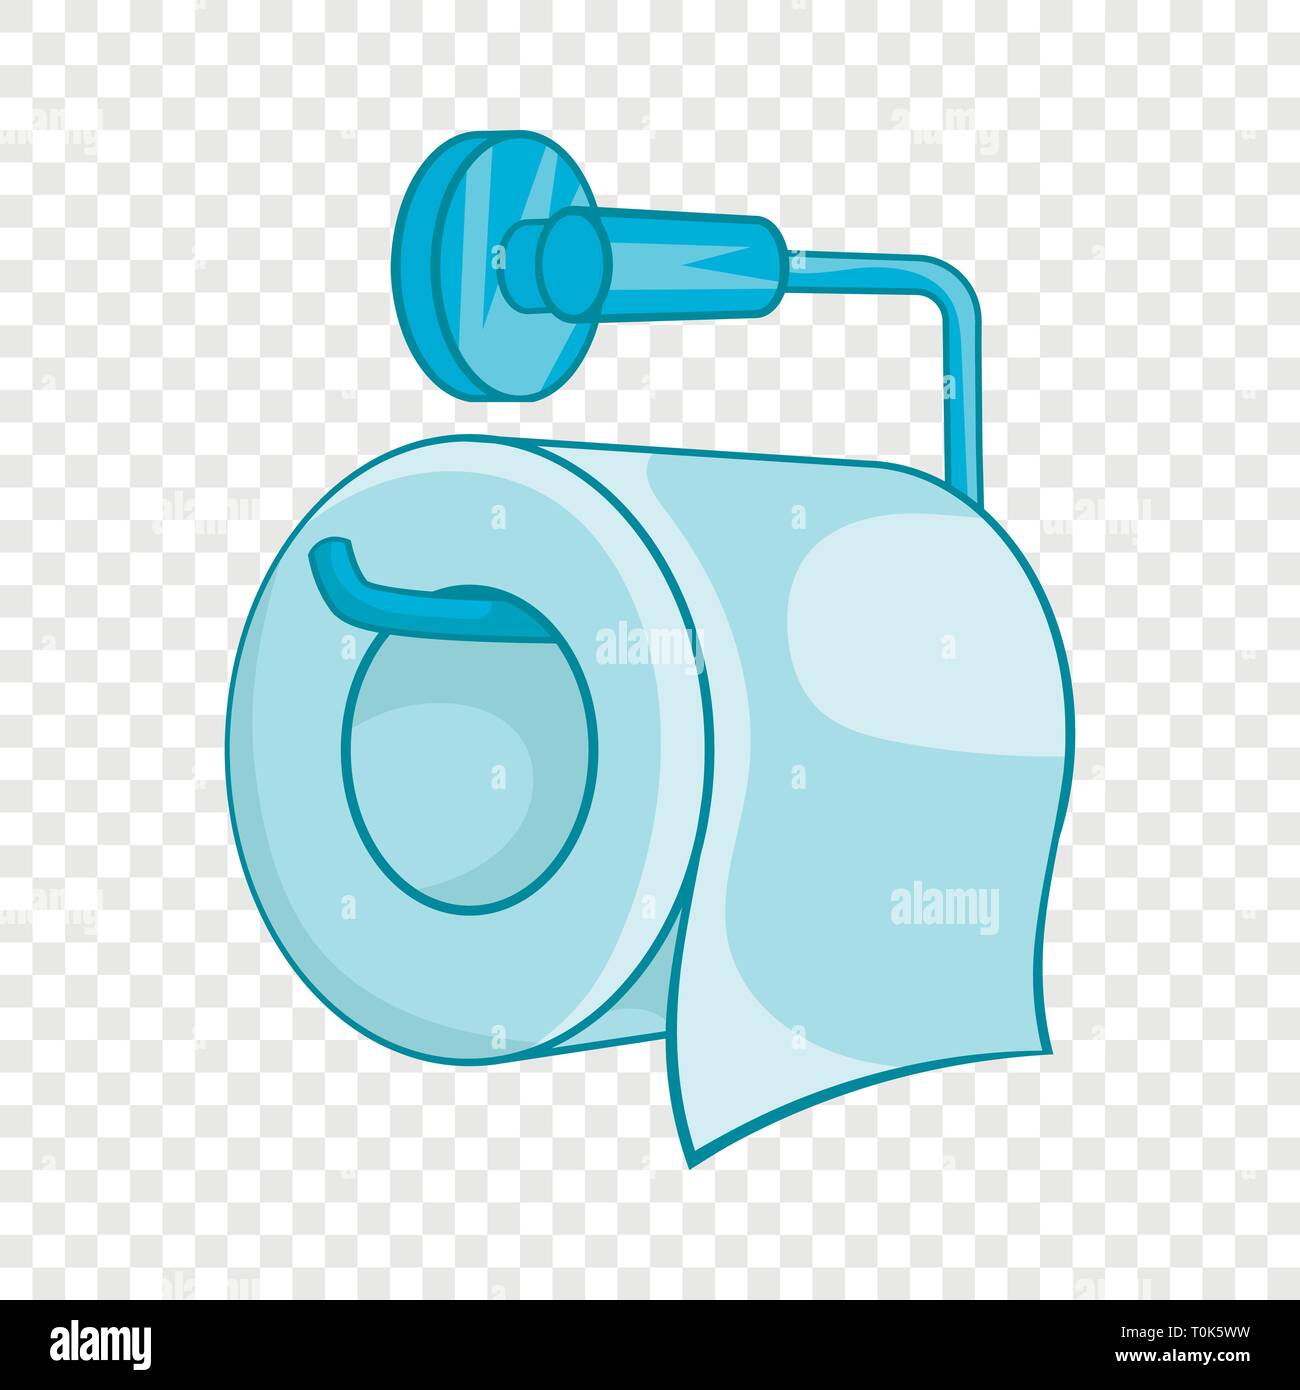 Toilet paper icon in cartoon style Stock Vector